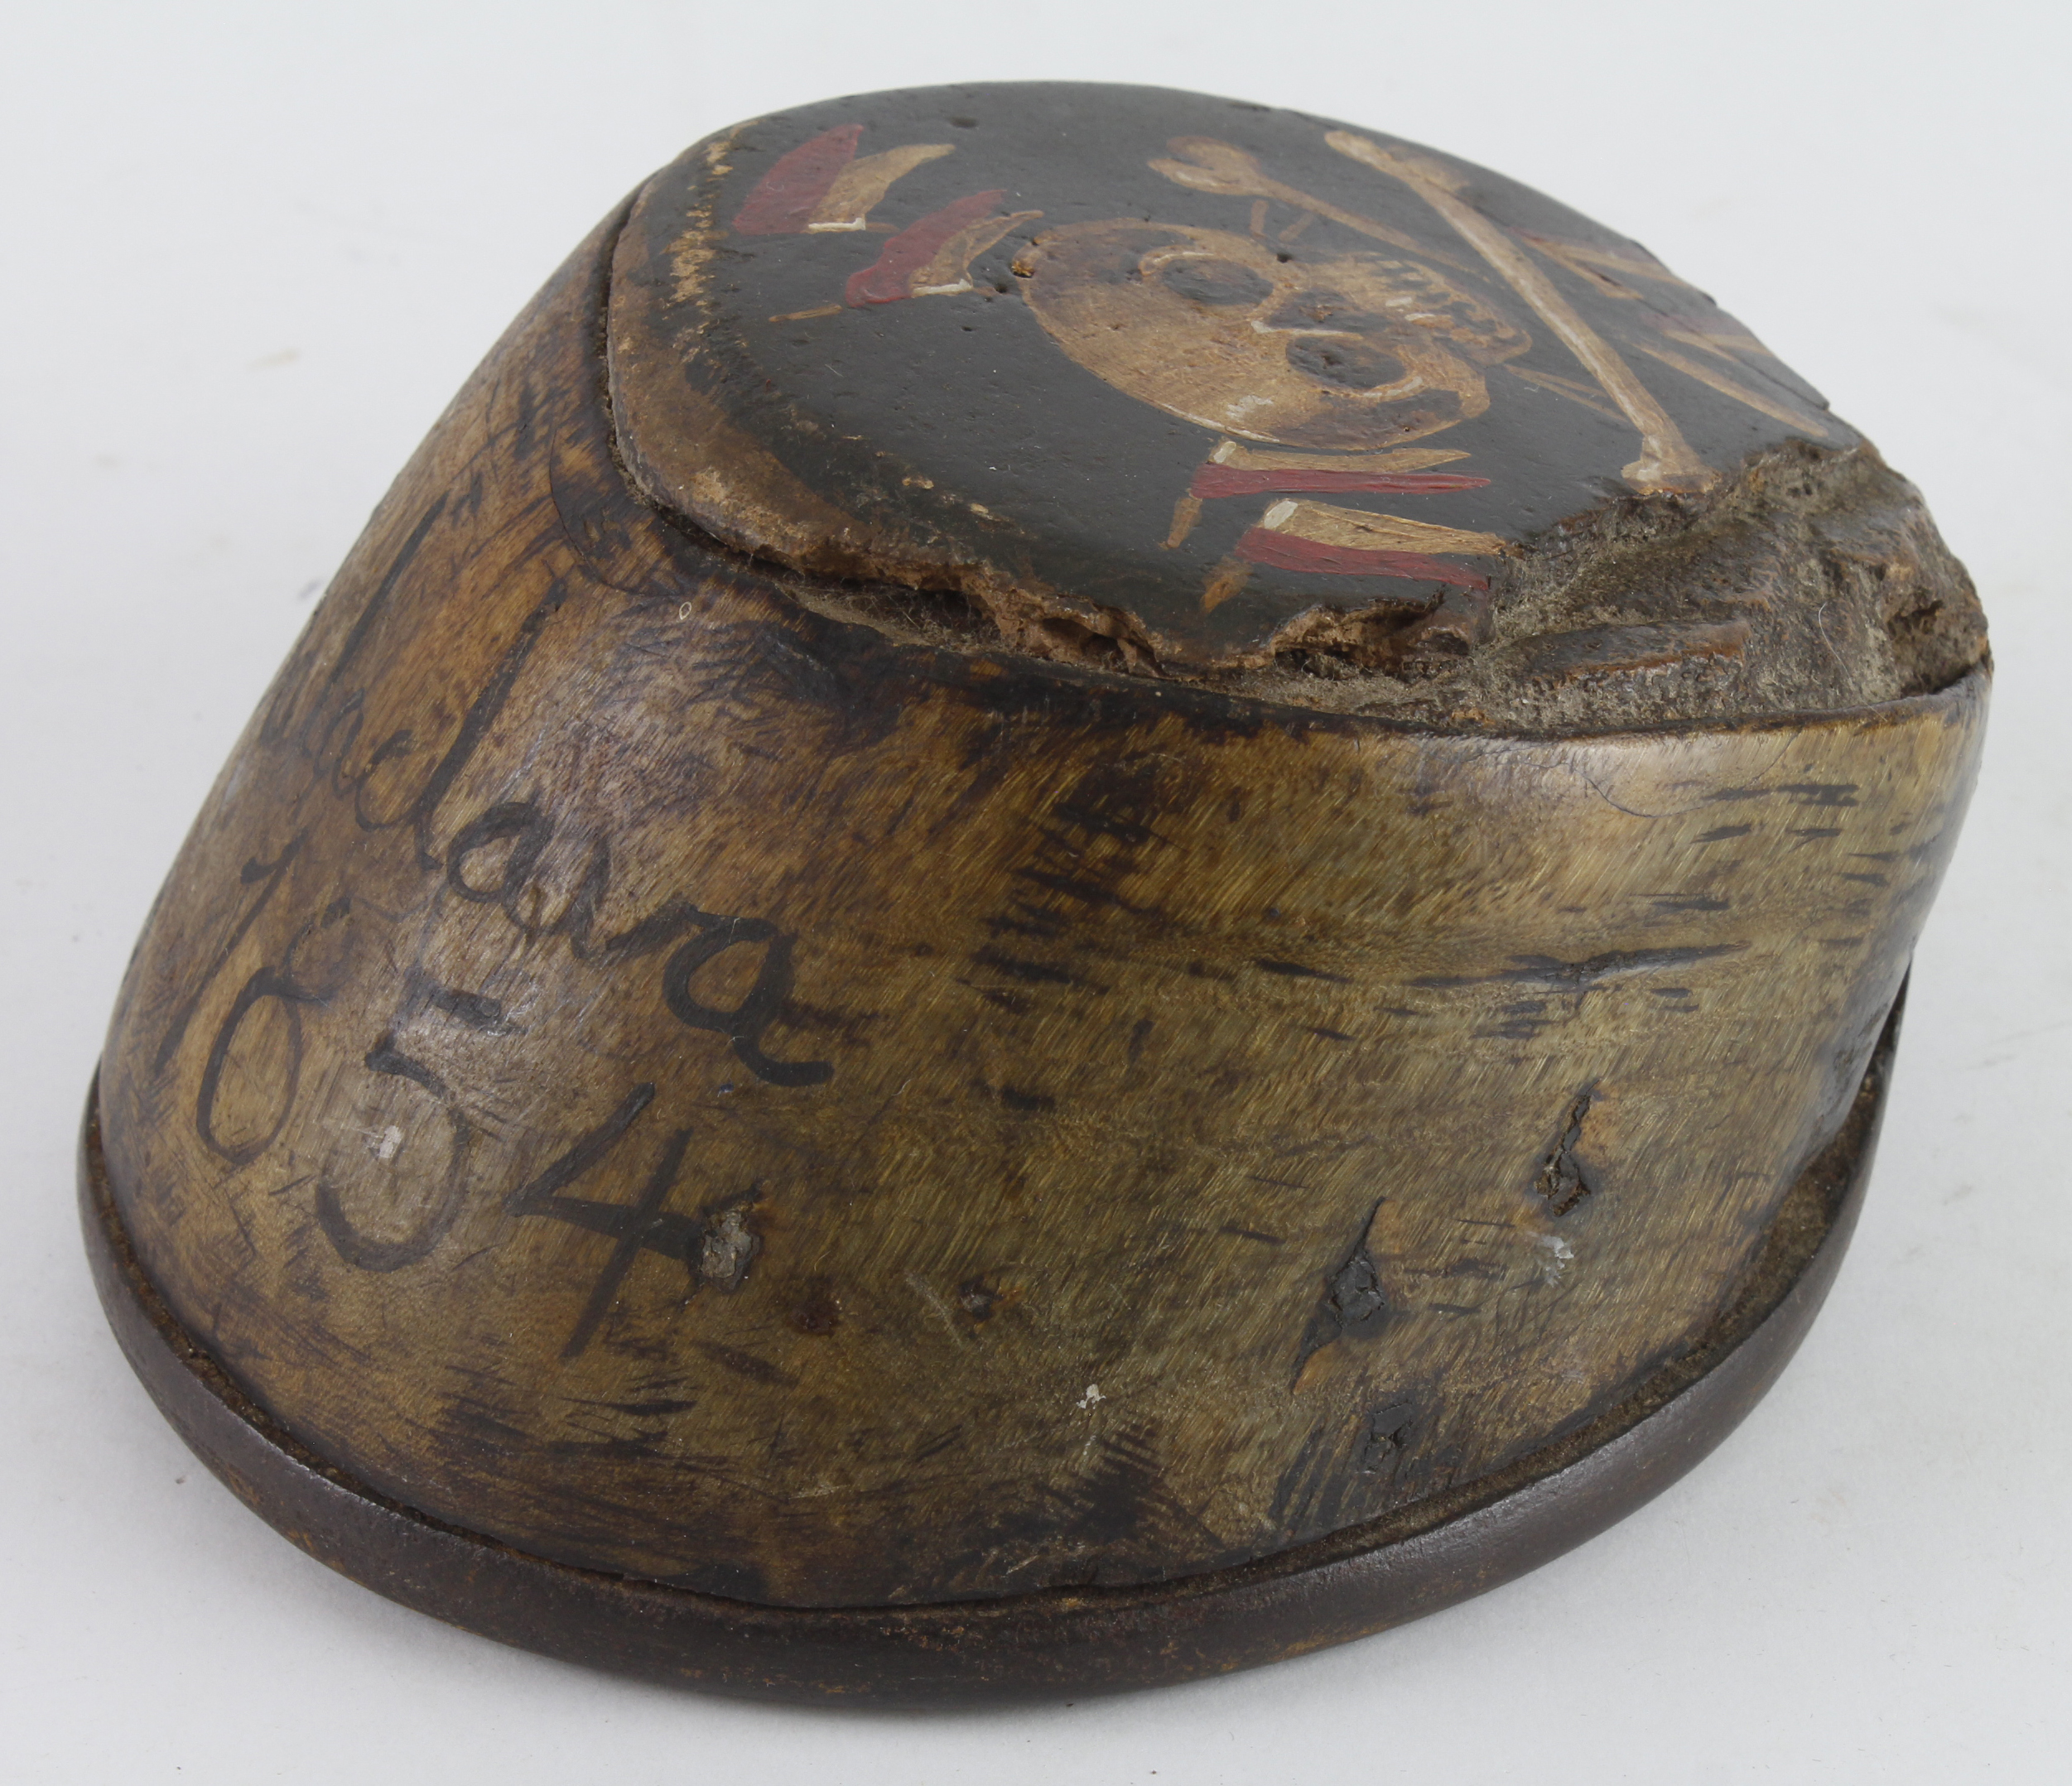 Crimea interest a Horses Hoof decorated for the 17th Lancers and added Balaklava 1854, it was common